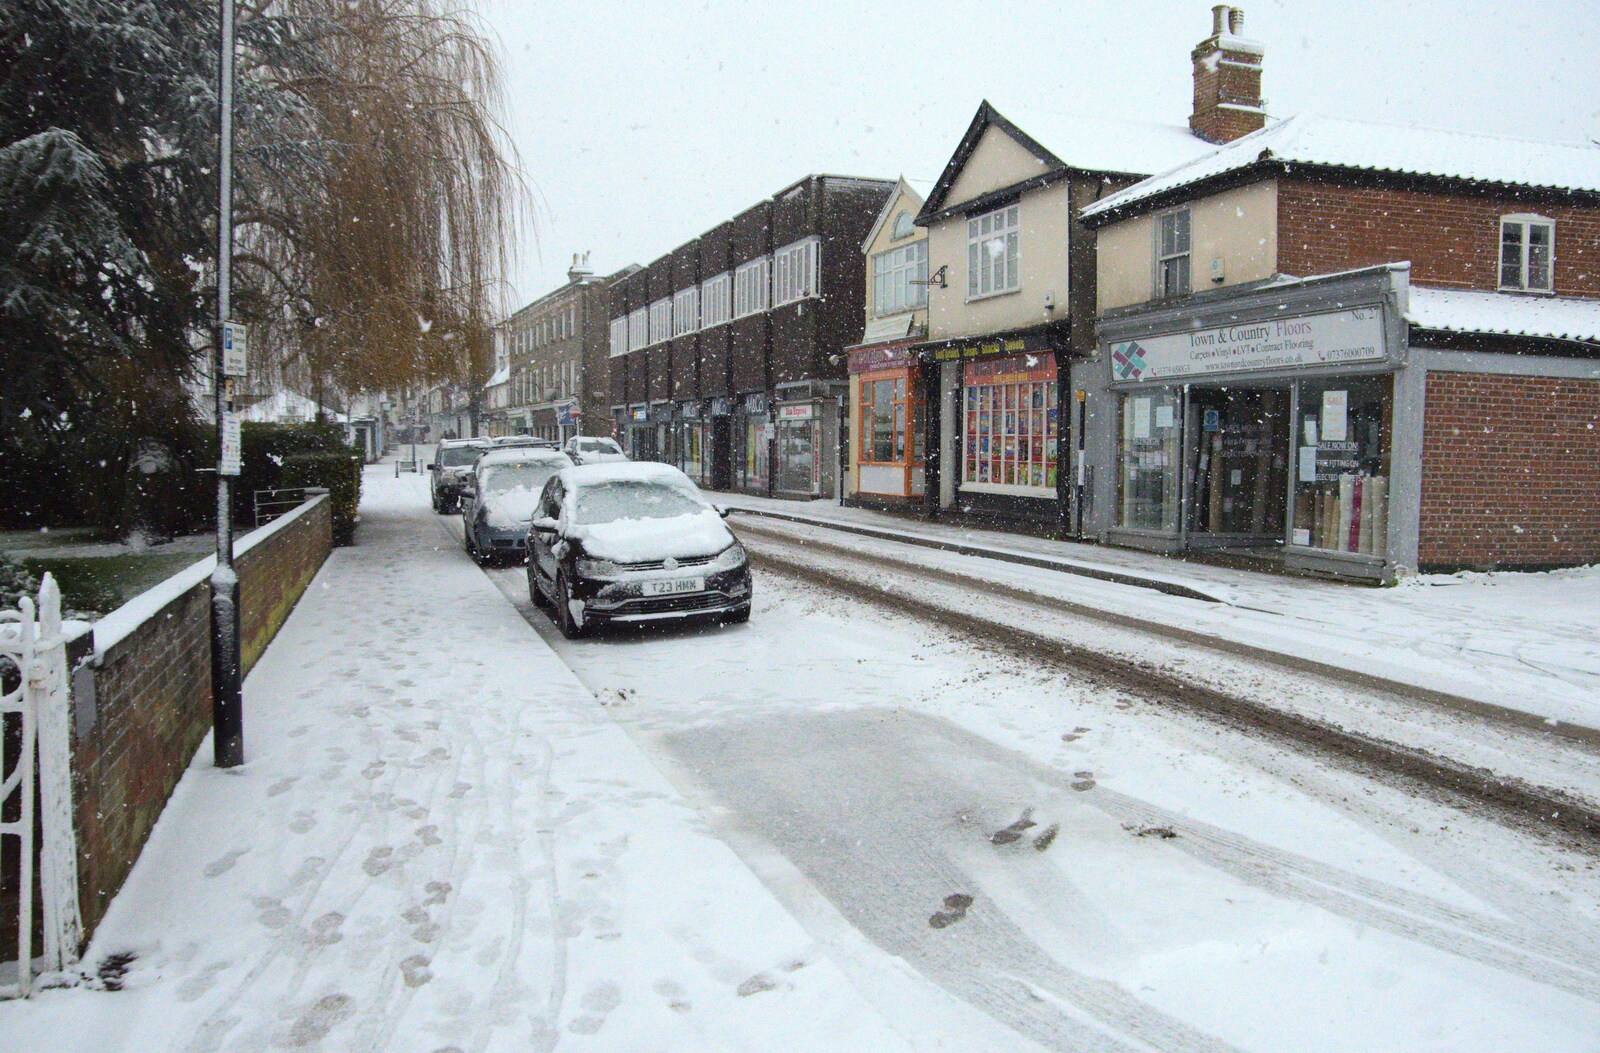 A few footsteps in the snow from A Snowy Morning, Diss, Norfolk - 16th January 2021